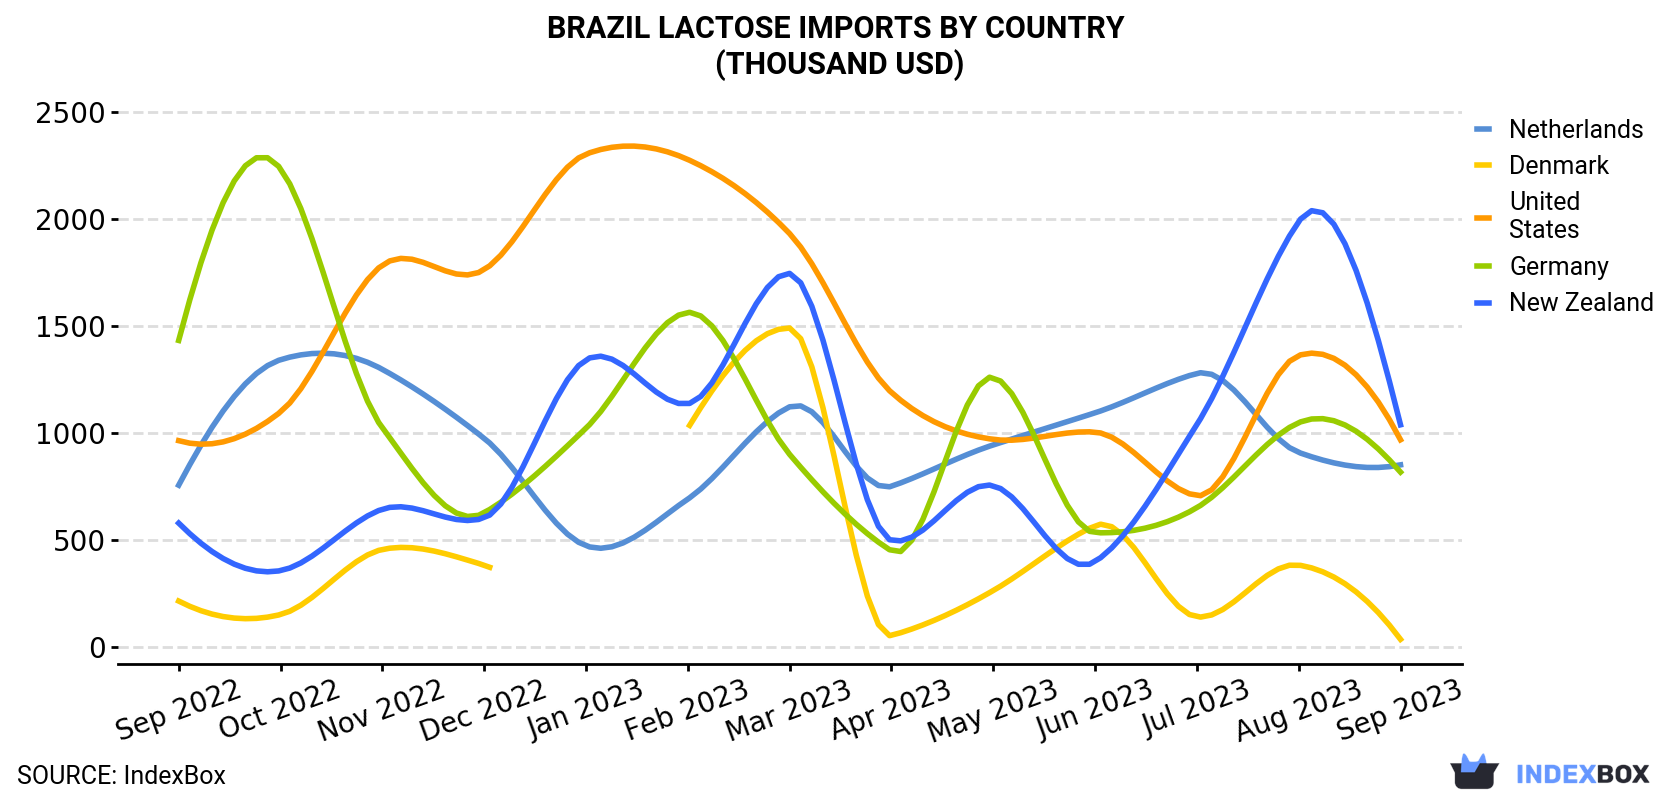 Brazil Lactose Imports By Country (Thousand USD)